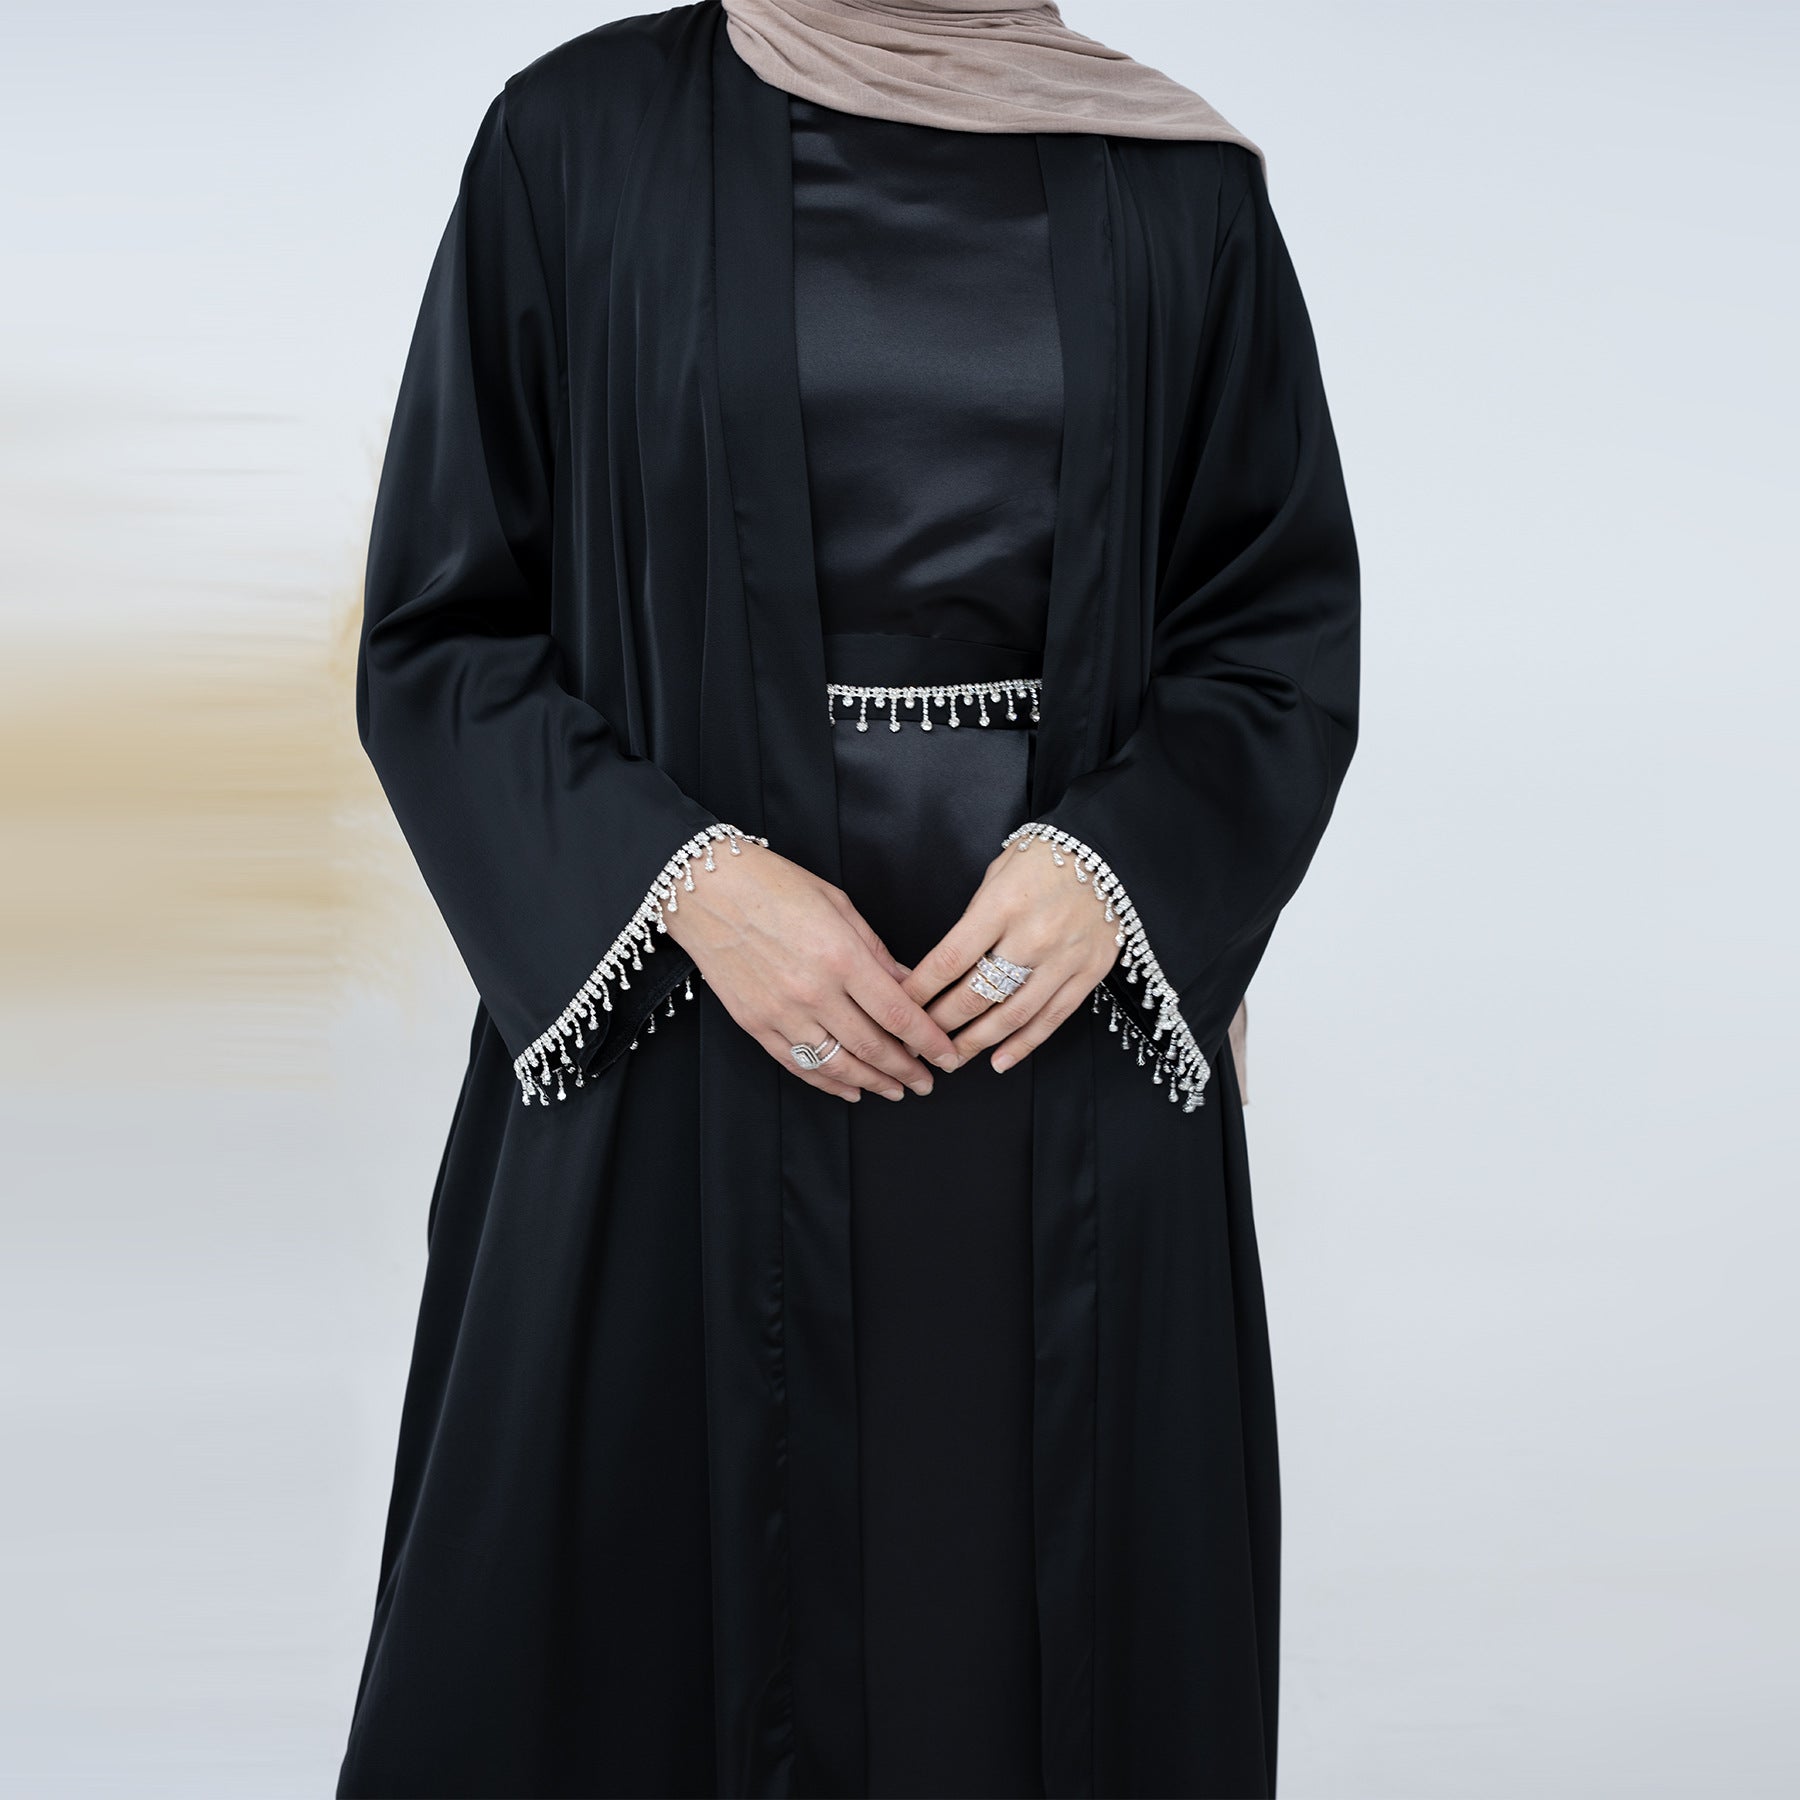 Discover sophistication and grace with the Malika Abaya in Black, exclusively available at Hikmah Boutique. Crafted from luxurious Satin silk material, this timeless abaya provides comfort and modesty. Elevate your modest clothing with our versatile 4-piece abaya set, perfect for Eid, Wedding and all occasions.